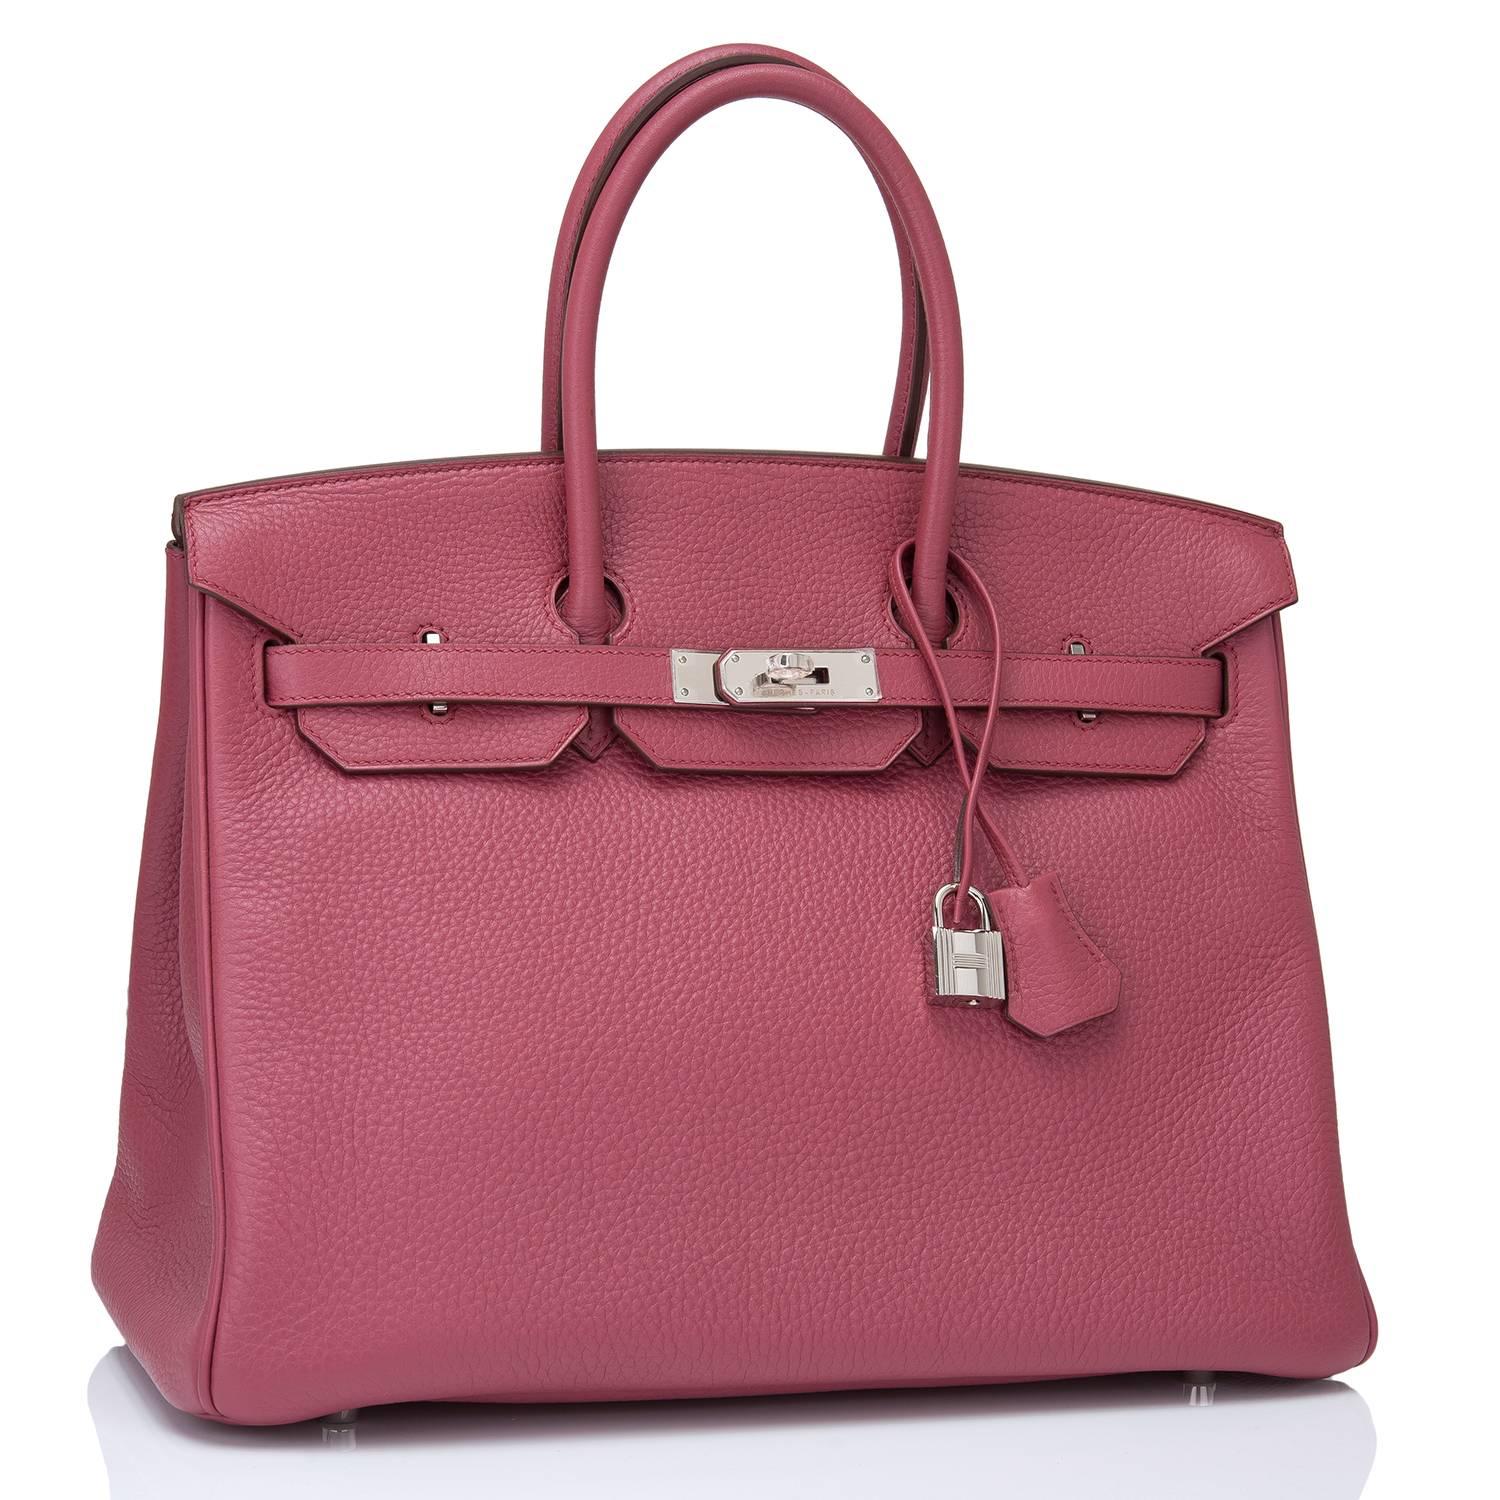 Hermes Bois de Rose 35cm of clemence leather with palladium hardware.

This Birkin has tonal stitching, a front toggle closure, a clochette with lock and two keys, and double rolled handles.

The interior is lined with Bois de Rose chevre and has